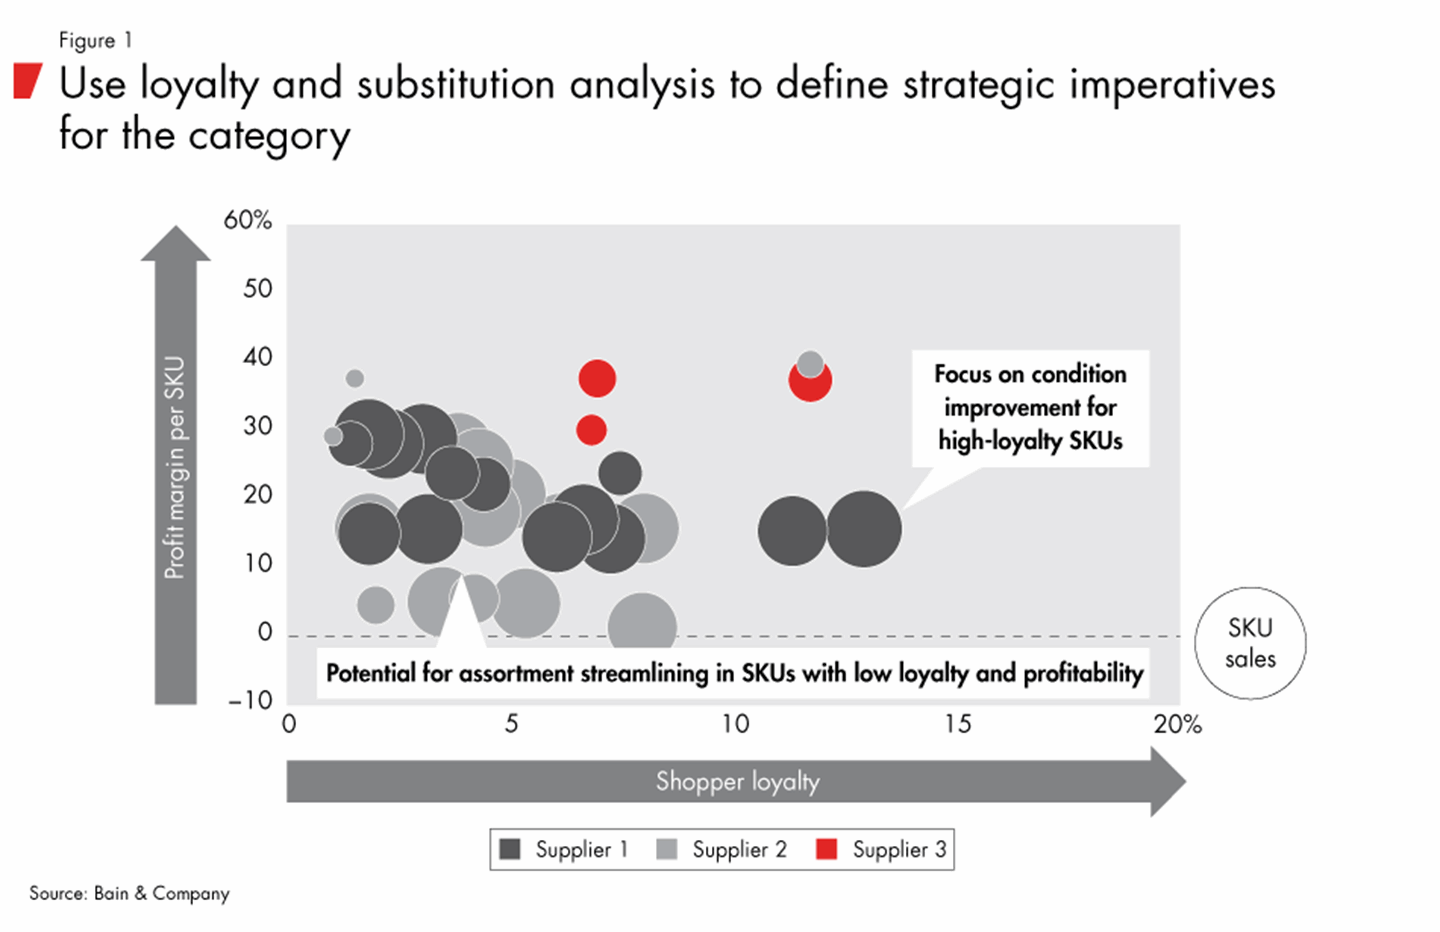 Use loyalty and substitution analysis to define strategic imperatives for the category